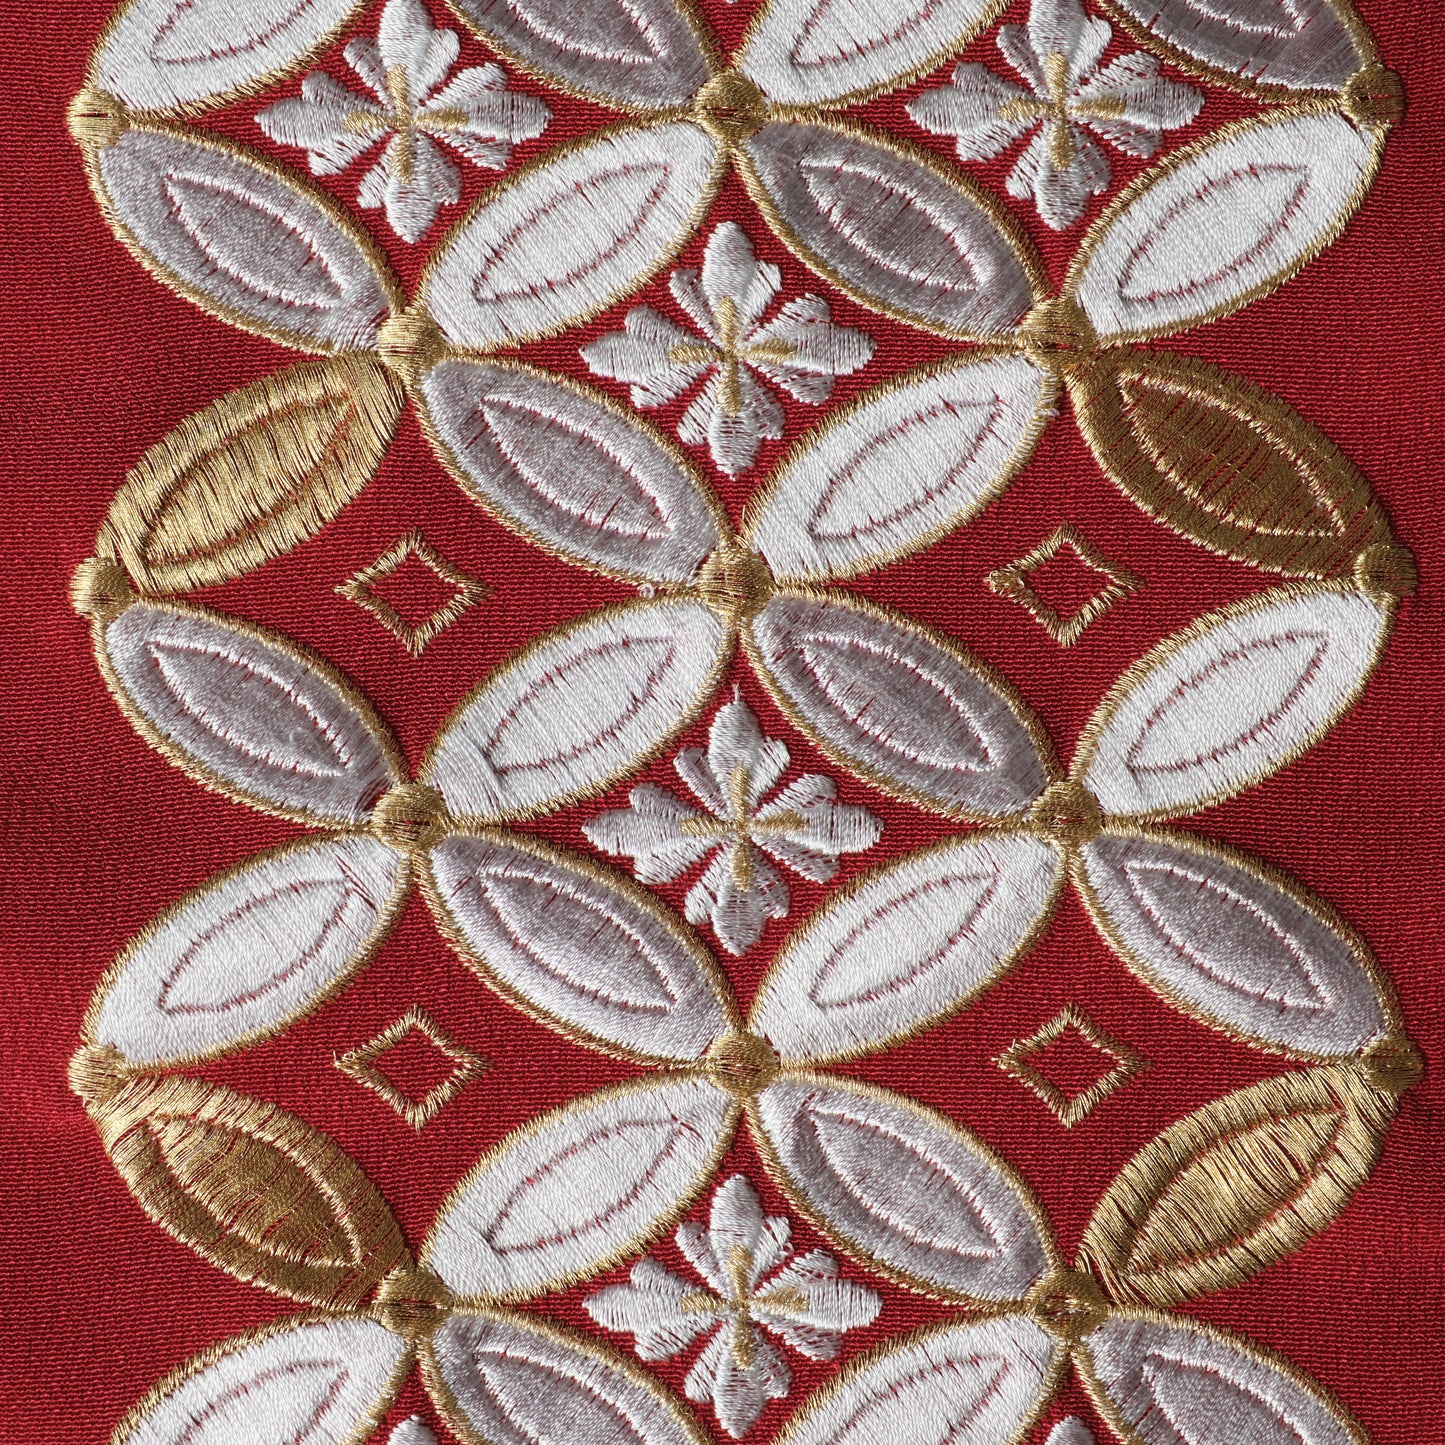 Half-collar embroidery "Cloisonne" red/gold